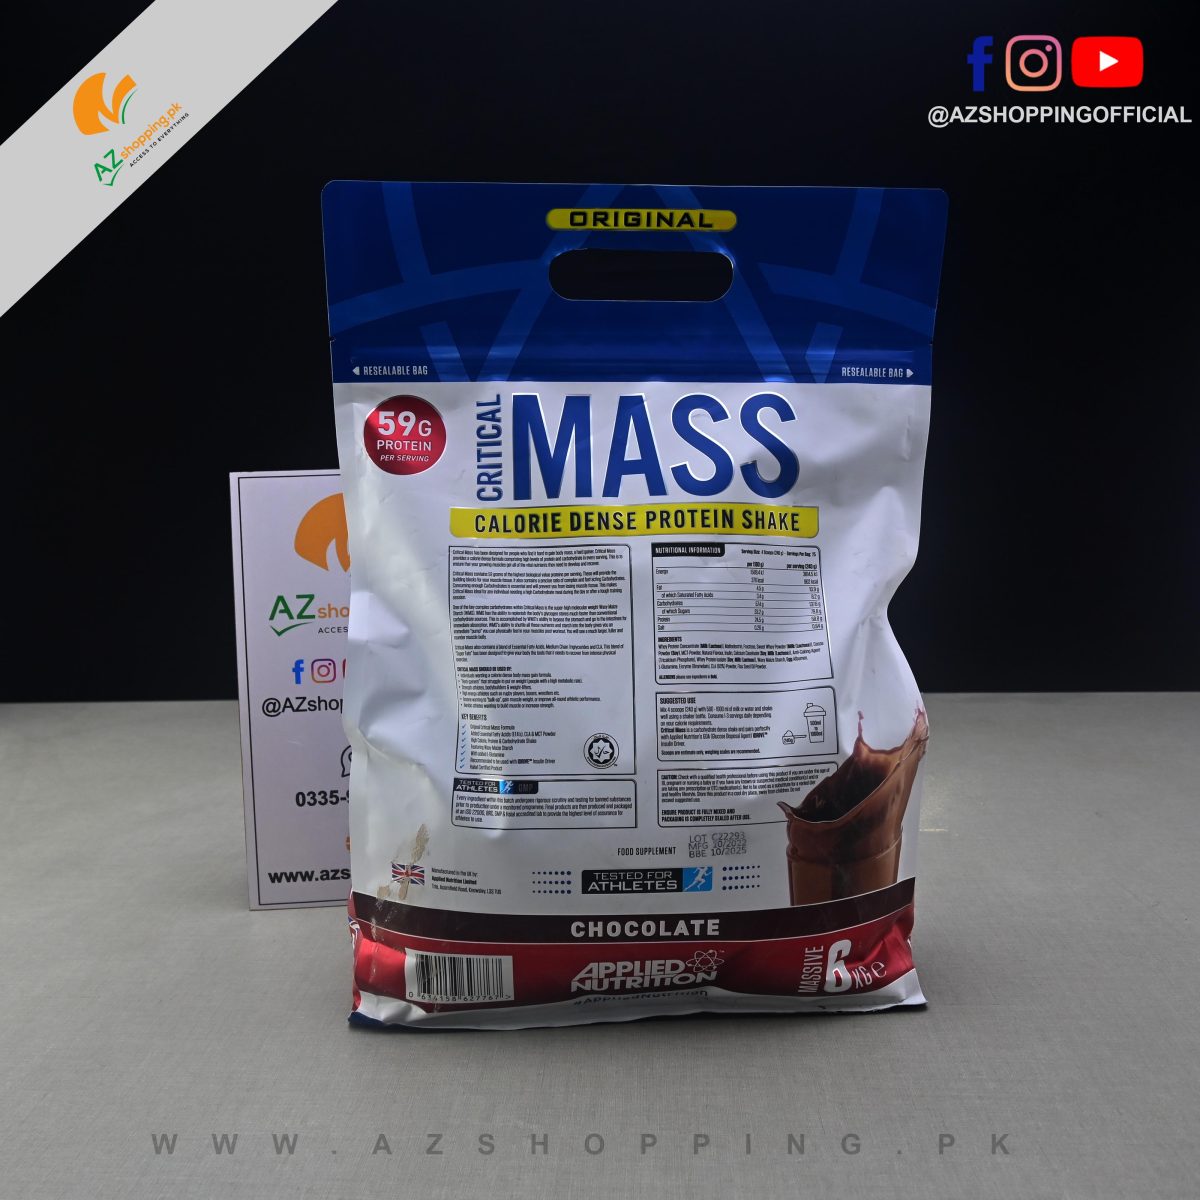 Applied Nutrition – Original Critical Mass – High Potency Weight Gainer Protein Powder For Mass & Strength – 6 kg